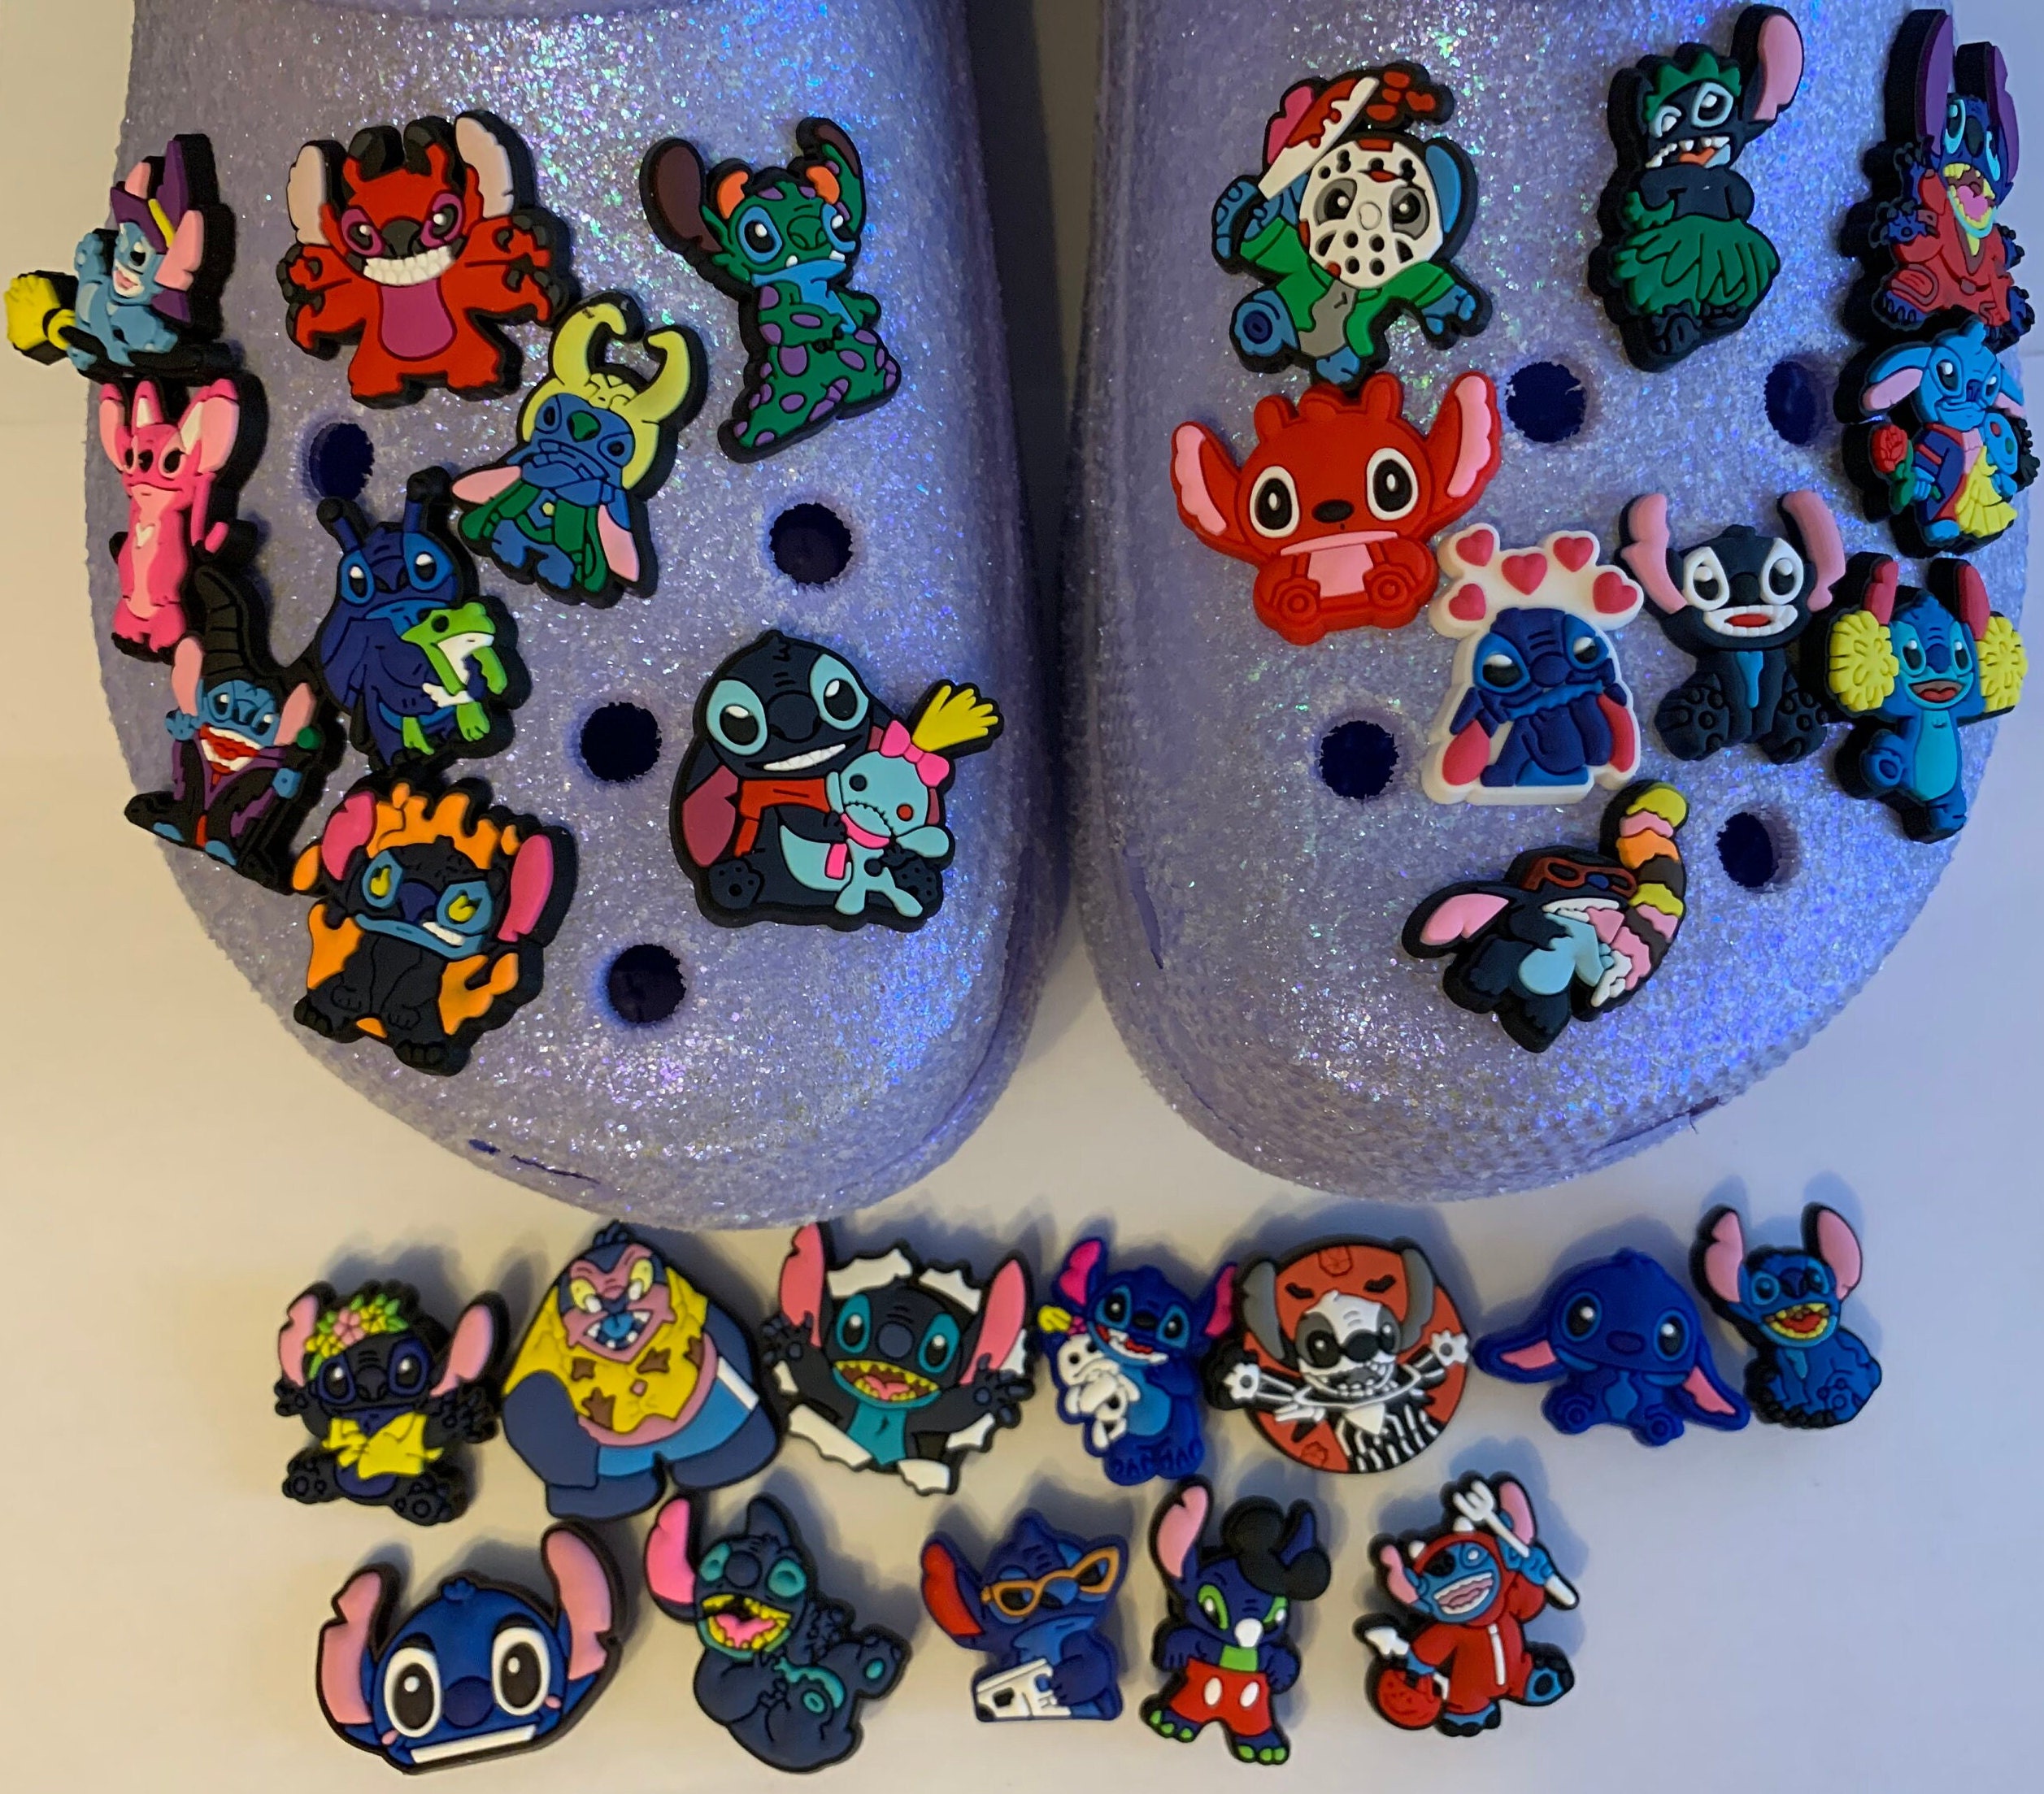 Office, Stitch Known As Experiment 626 Croc Charms